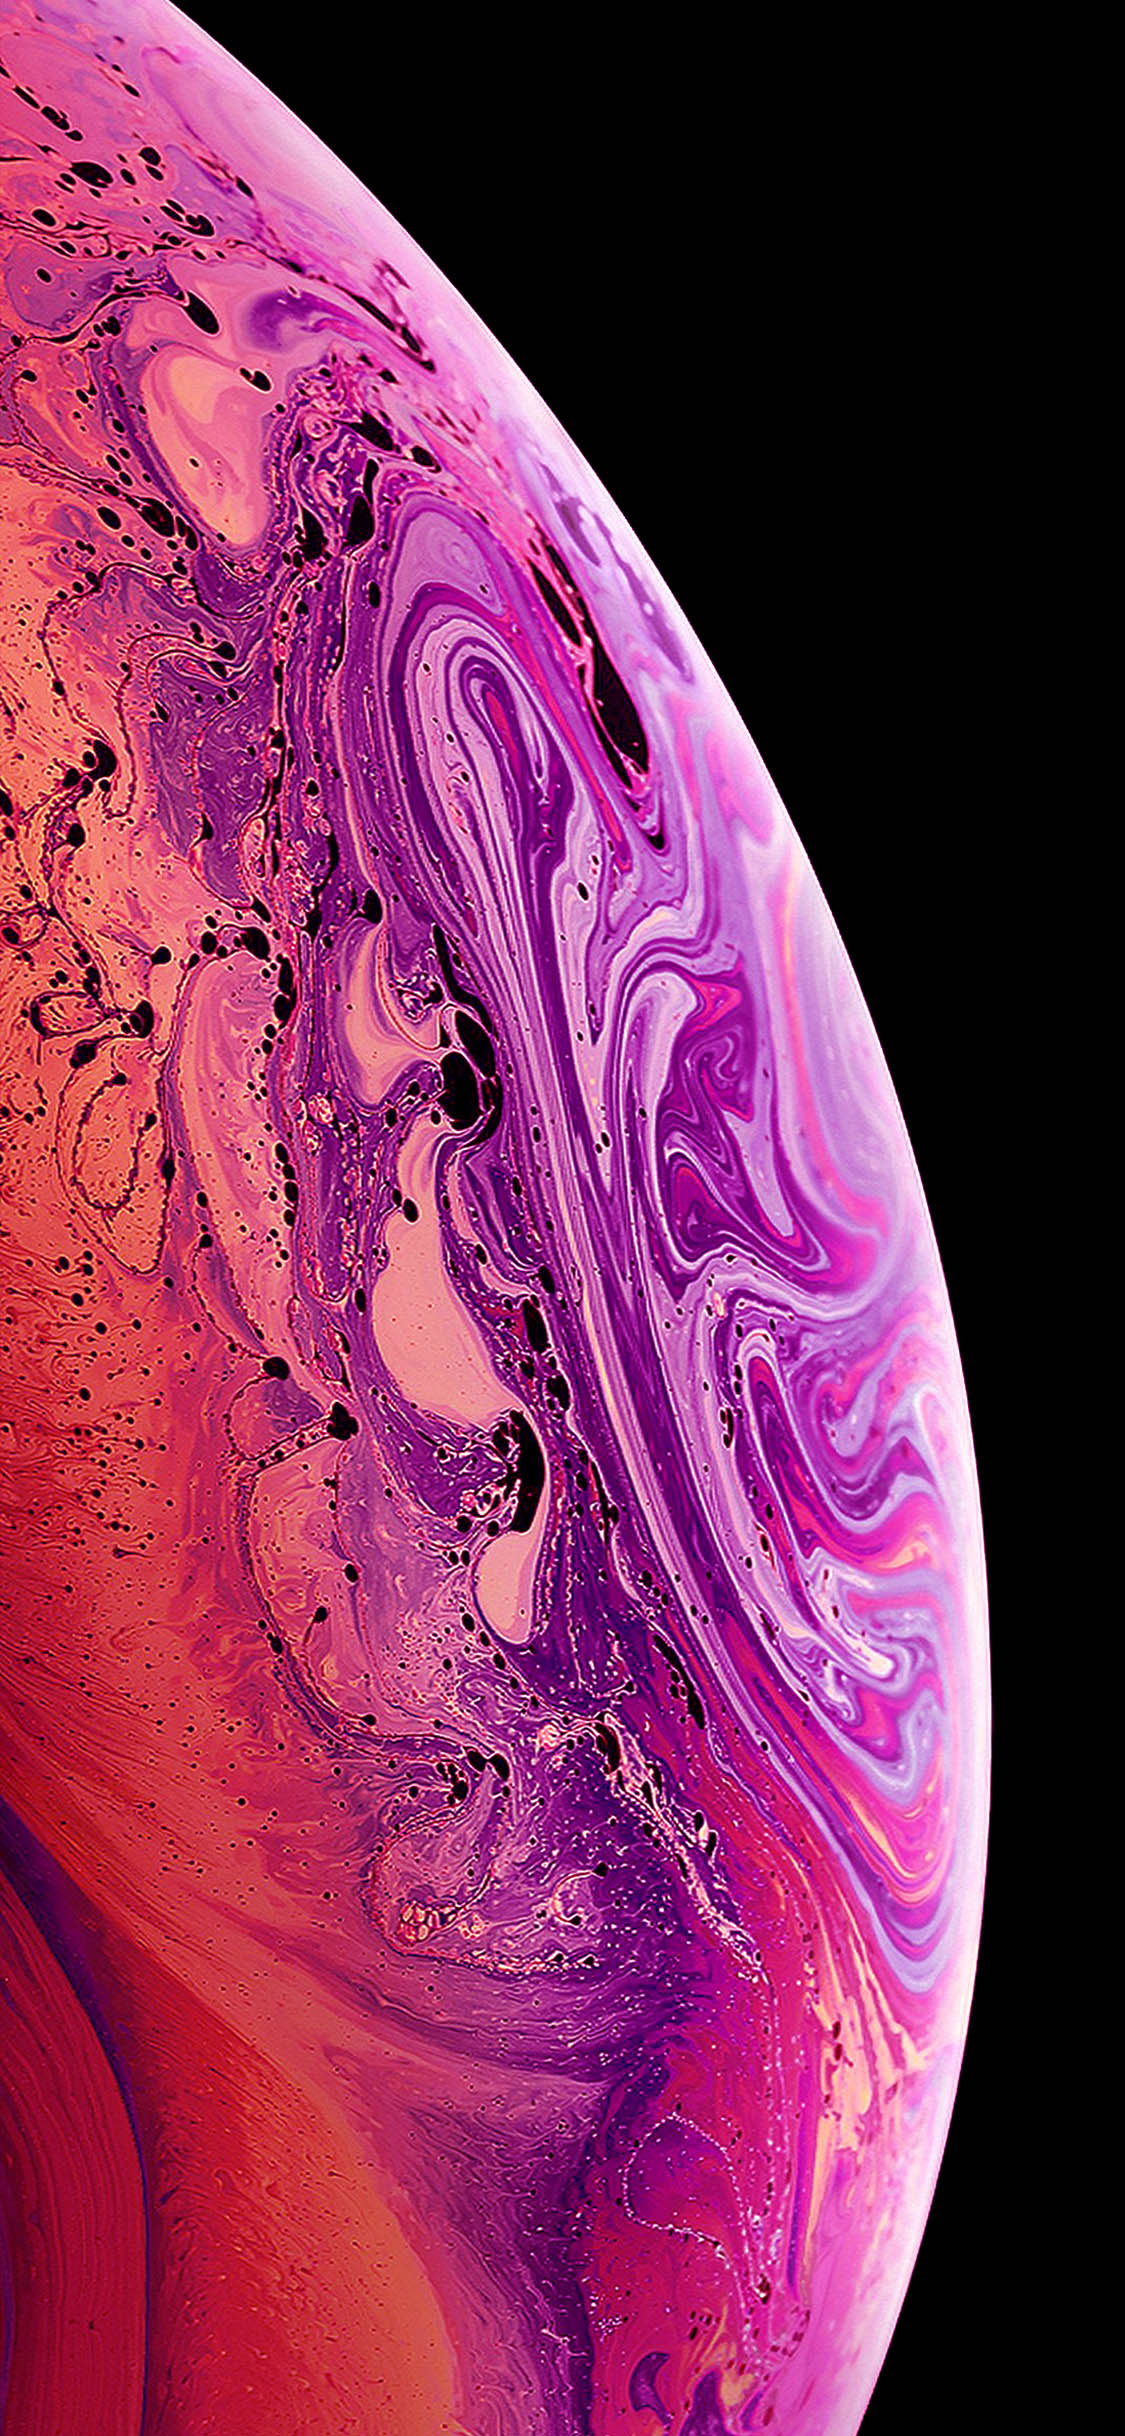 iPhone XS Stock Edited Wallpapers Mohamedovic 01